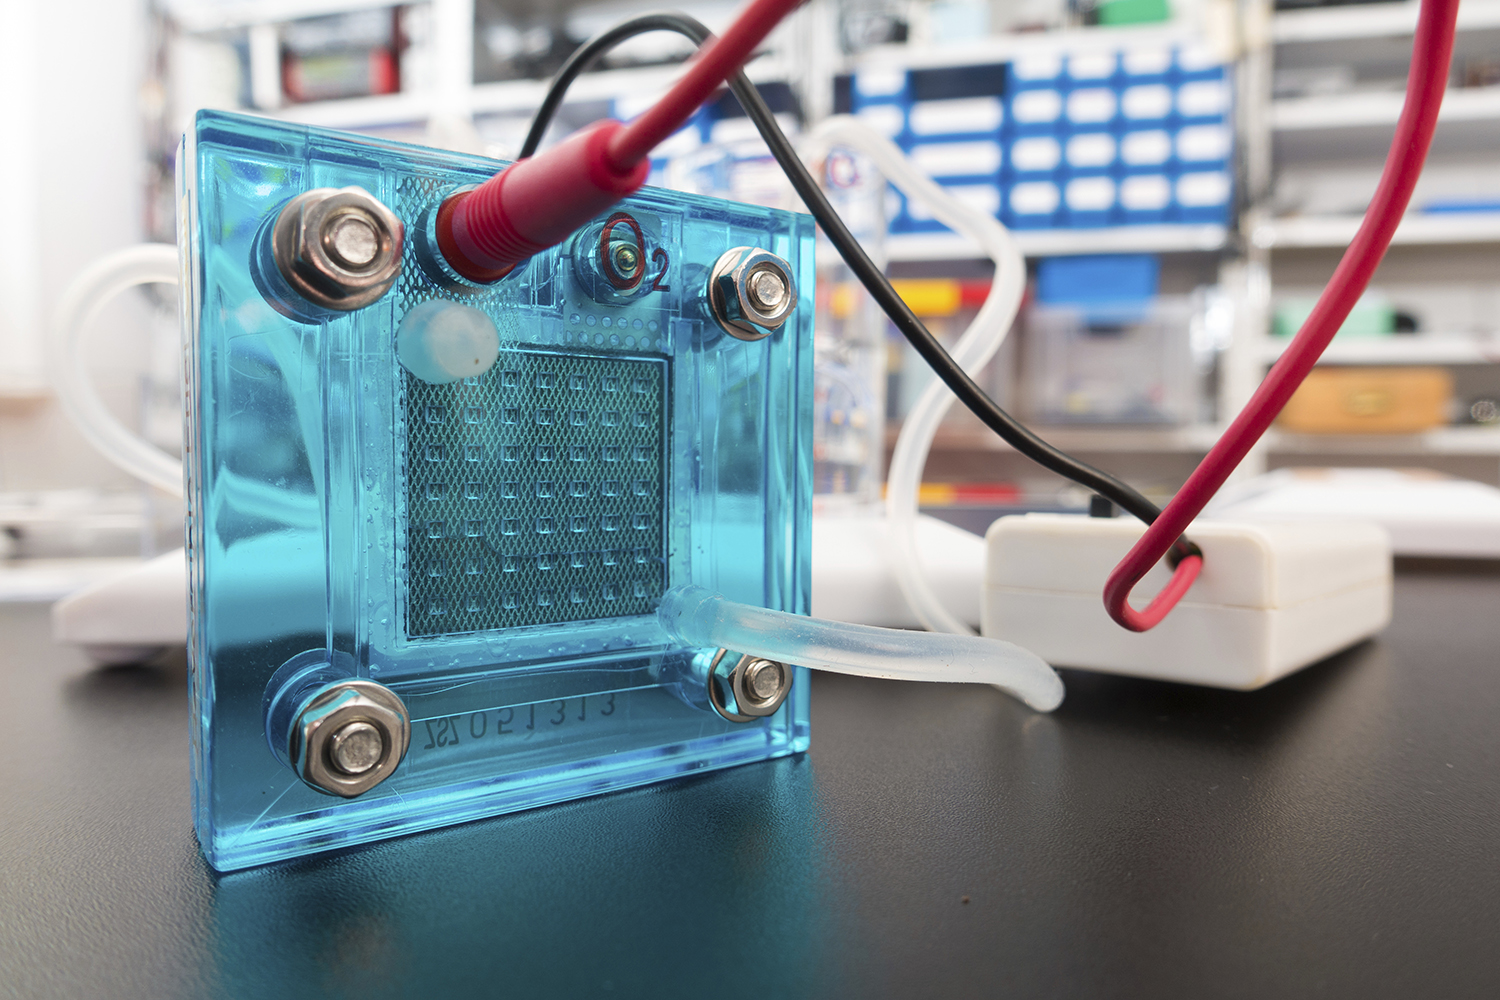 Hydrogen fuel cell, close up.